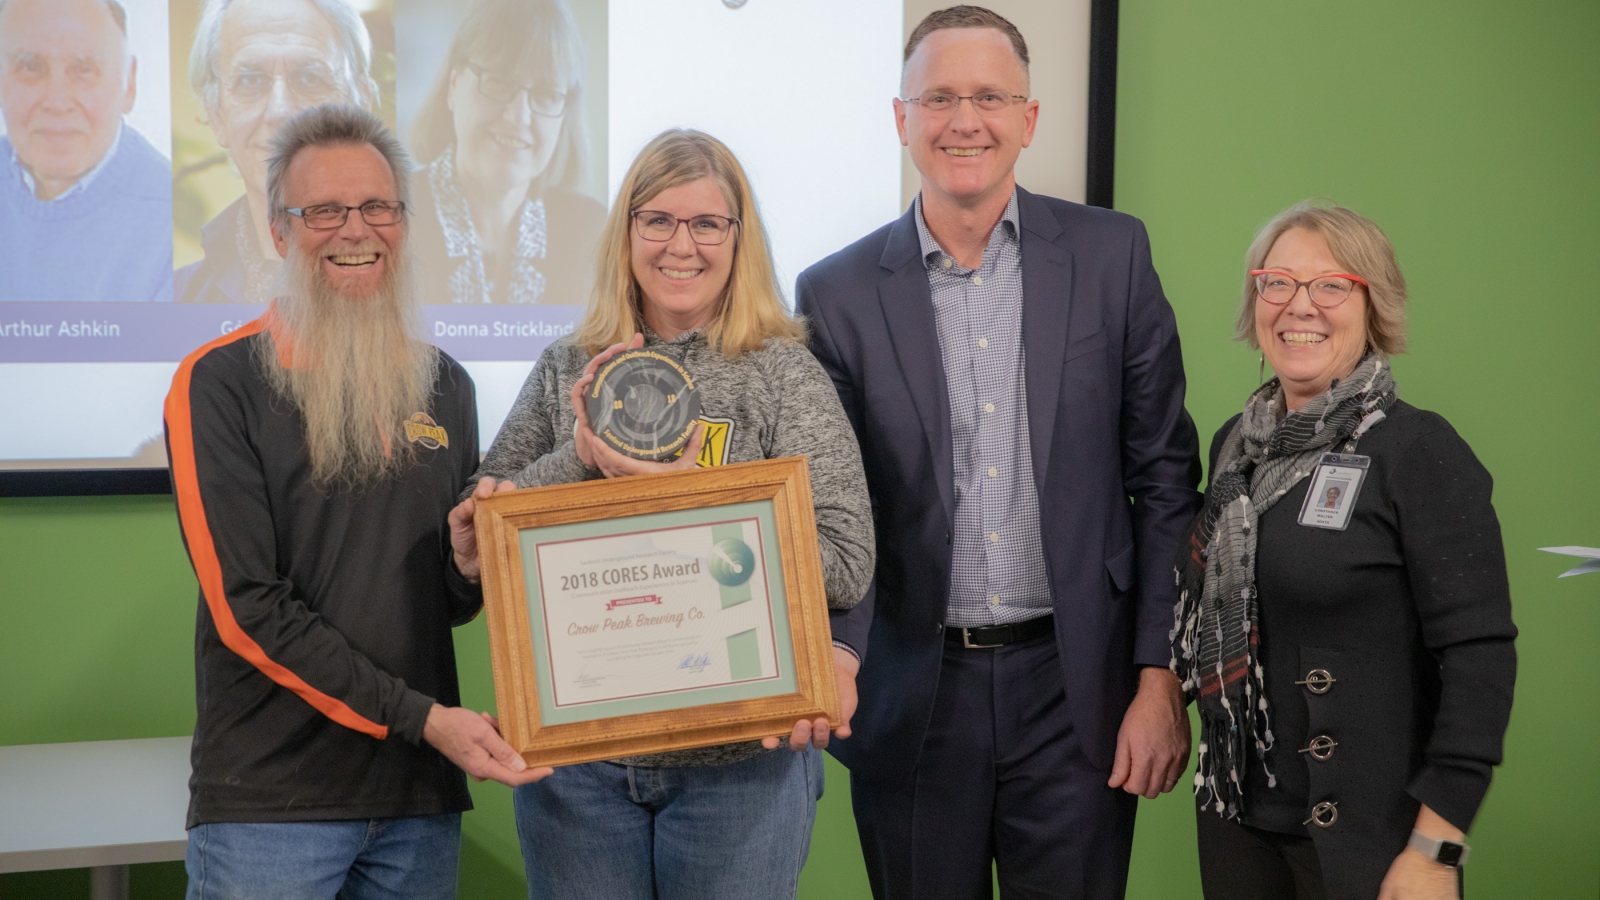 The first CORES award presented to Crow Peak Brewing Co. Pictured left to right are Crow Peak Brewing Co. owners Jeff Drumm and Carolyn Ferrel, SURF Executive Director Mike Headley and Communication Director Constance Walter.